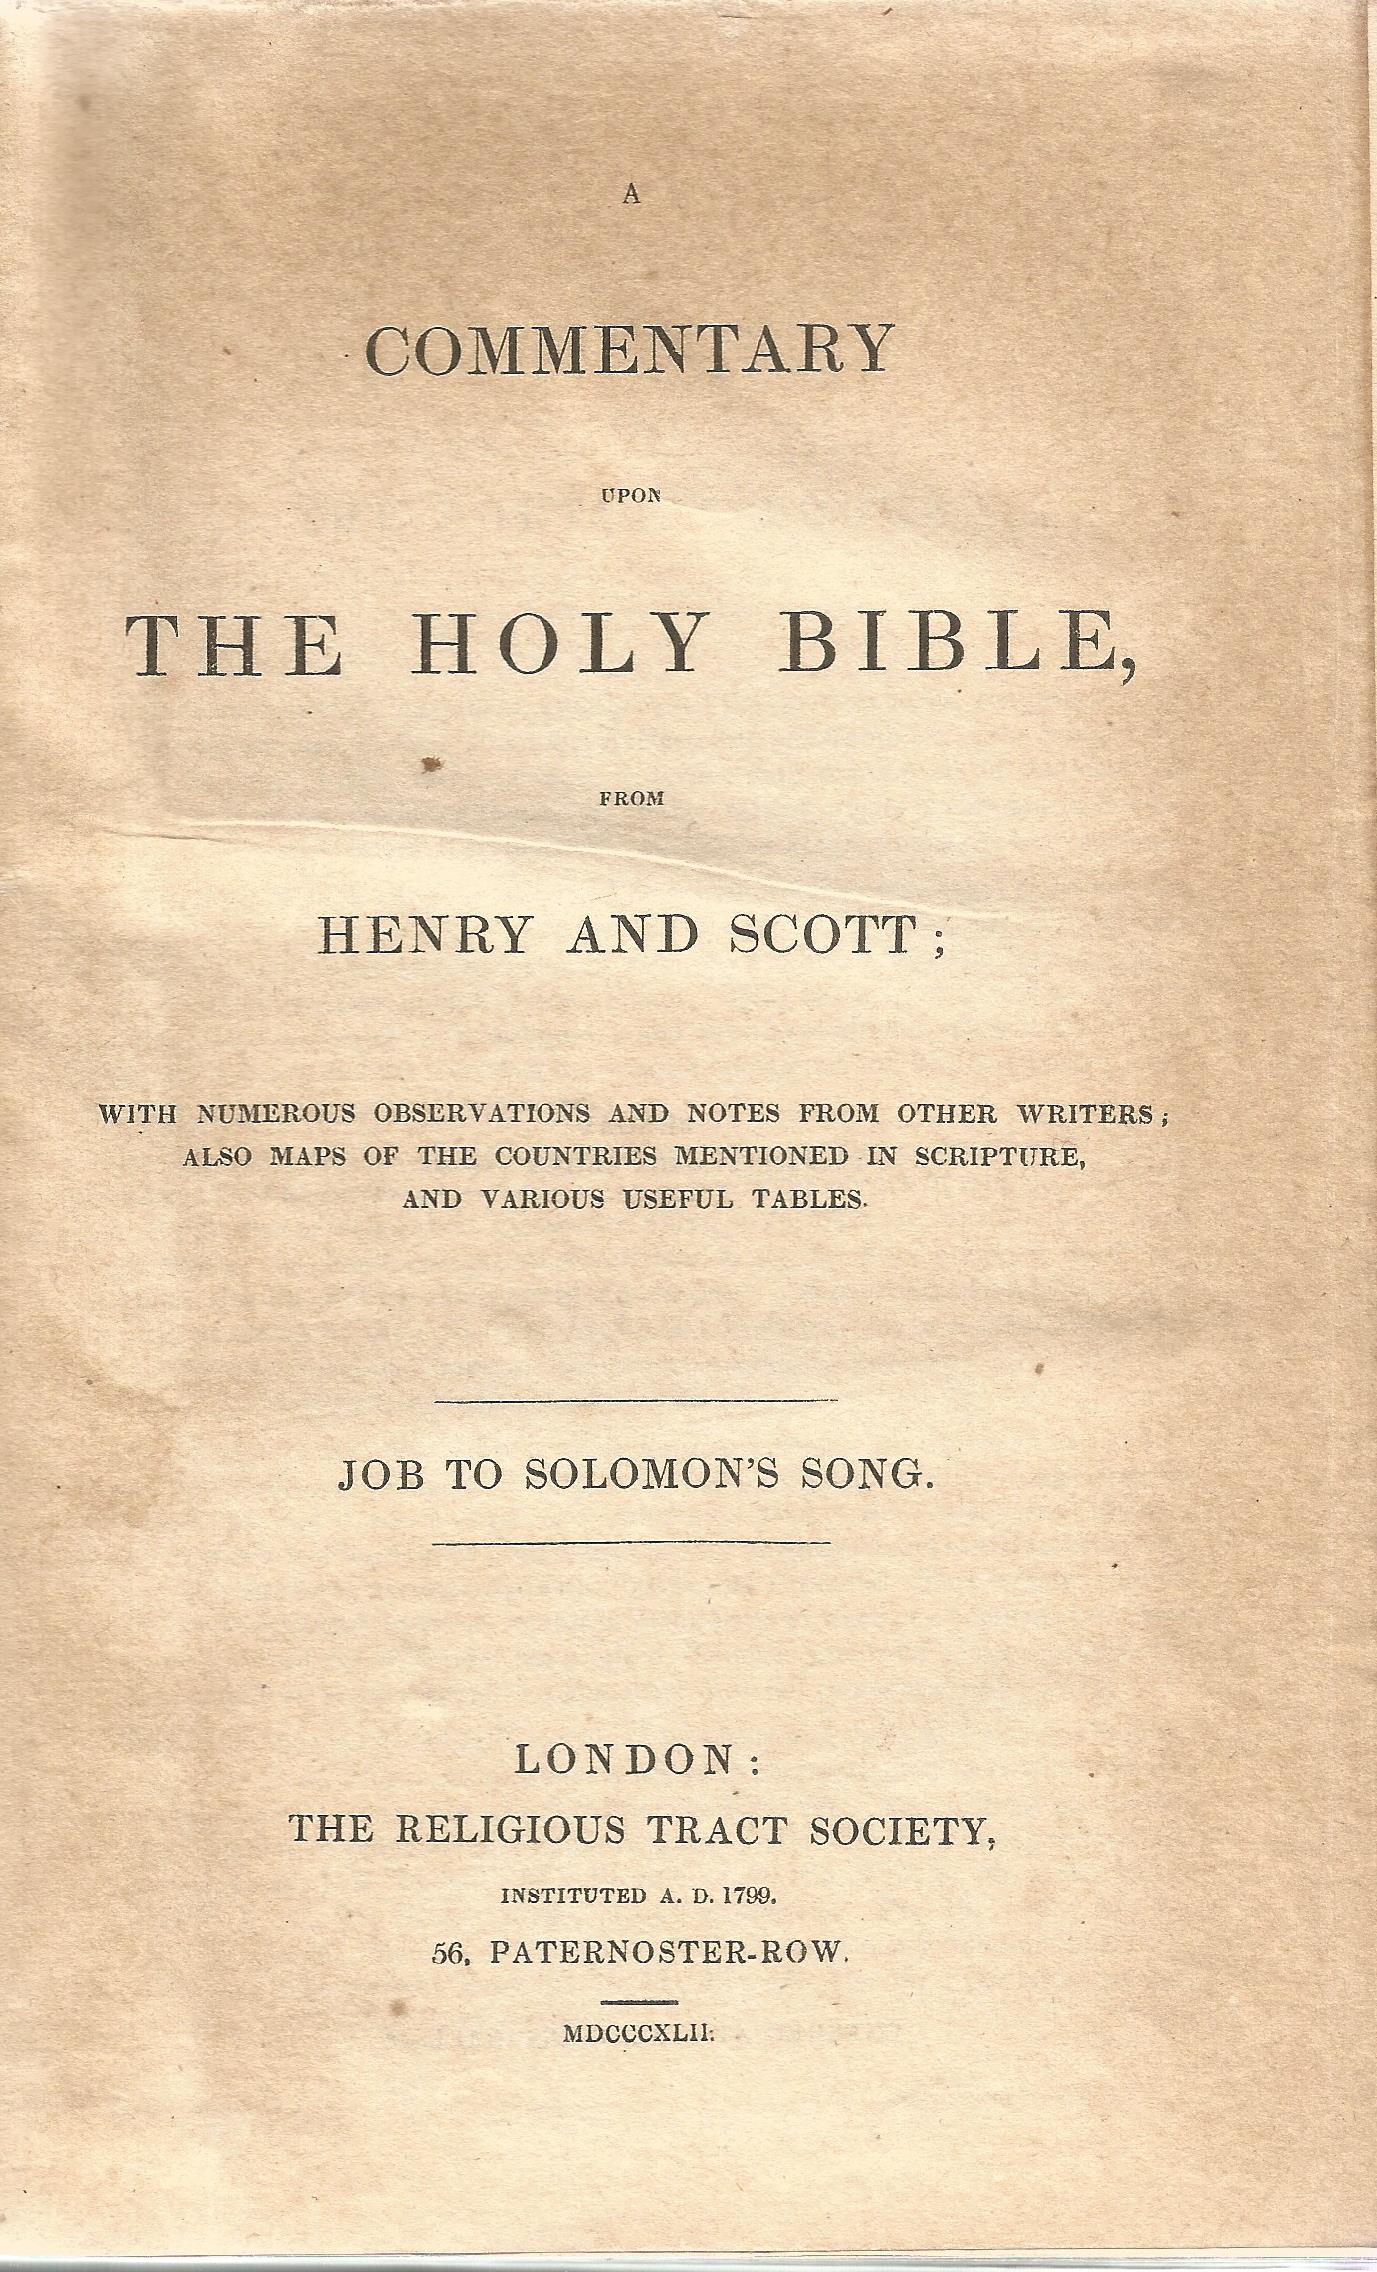 A Commentary from The Holy Bible Job to Solomon's Song from Henry and Scott 1842 published by The - Image 2 of 2